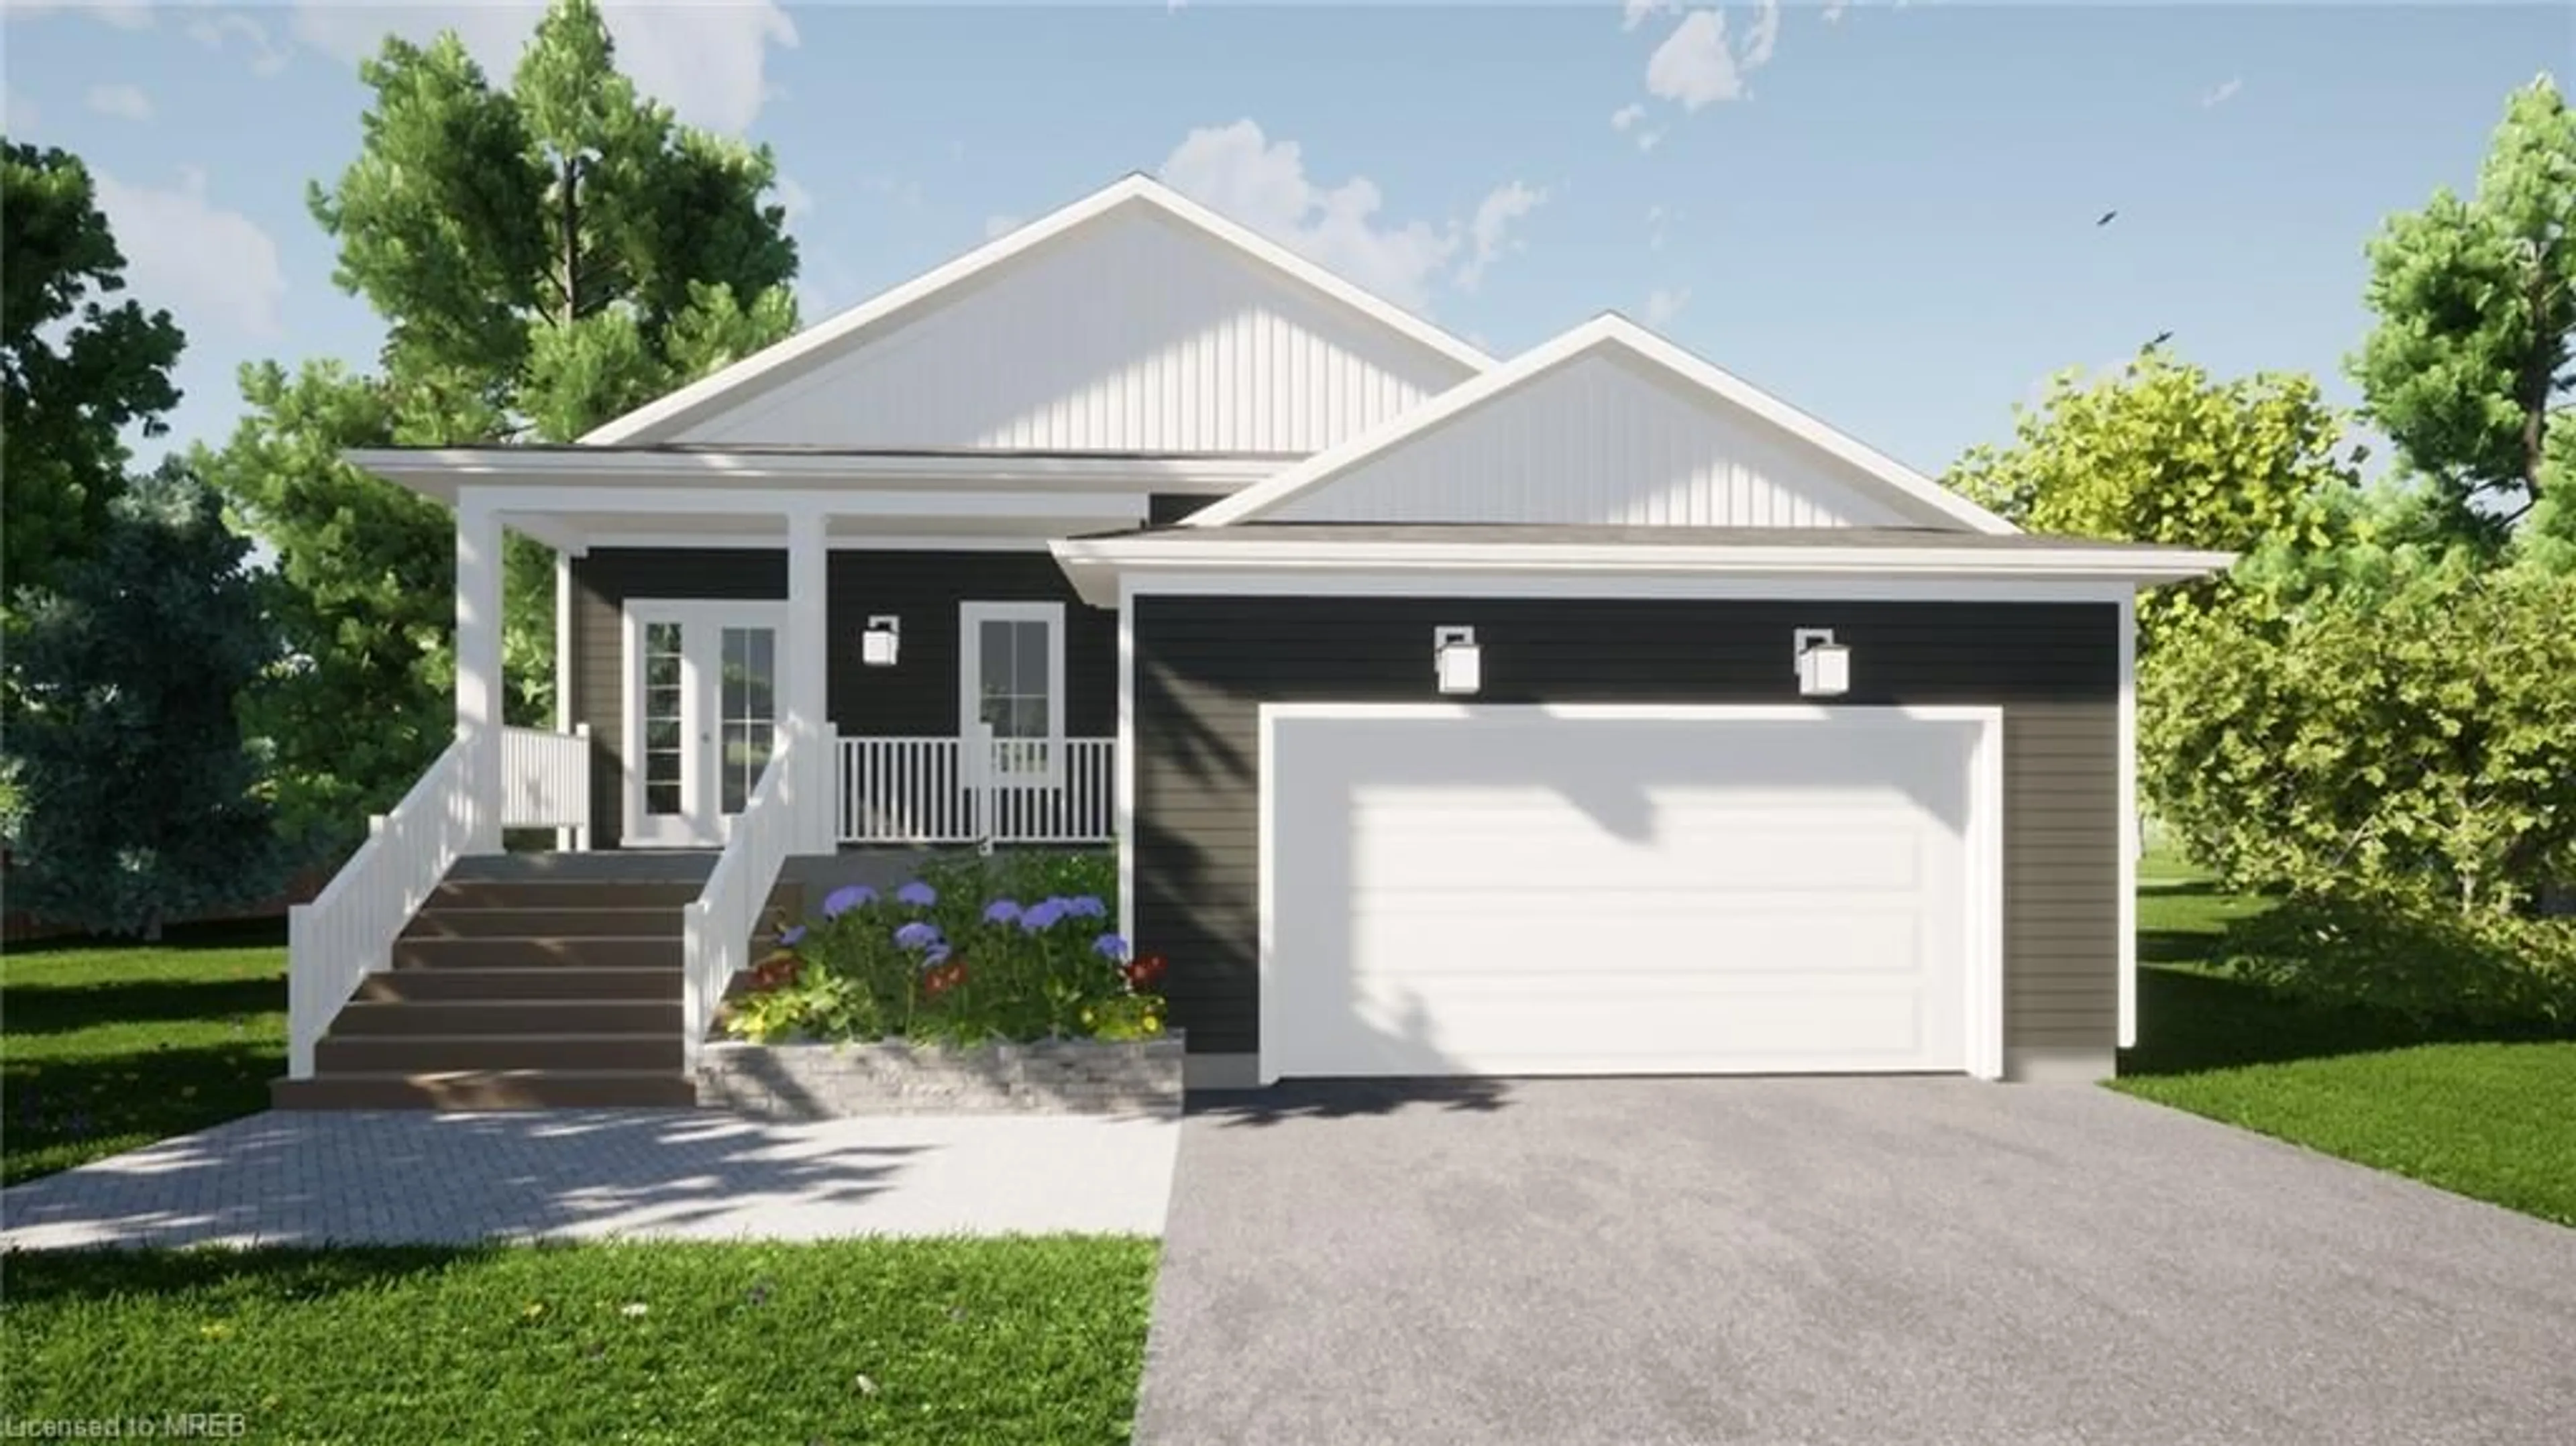 Home with vinyl exterior material for 64 52 St, Wasaga Beach Ontario L9Z 1W8